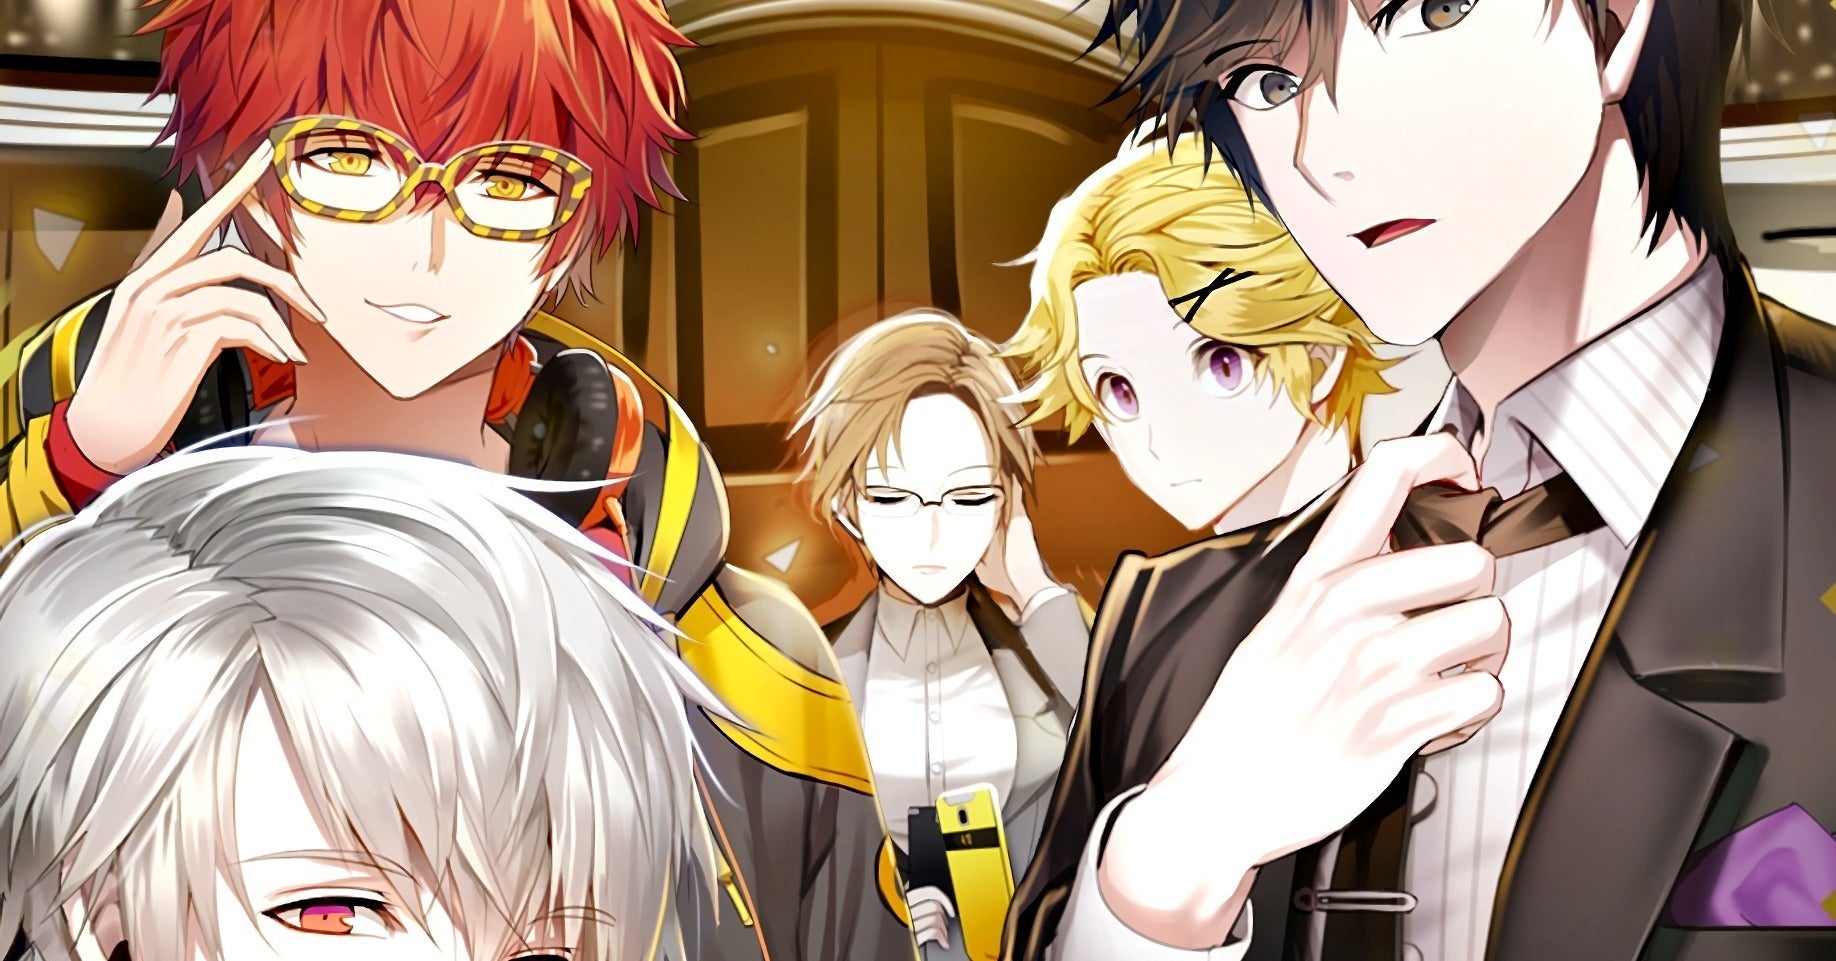 Which Character From "Mystic Messenger" Should You Date?